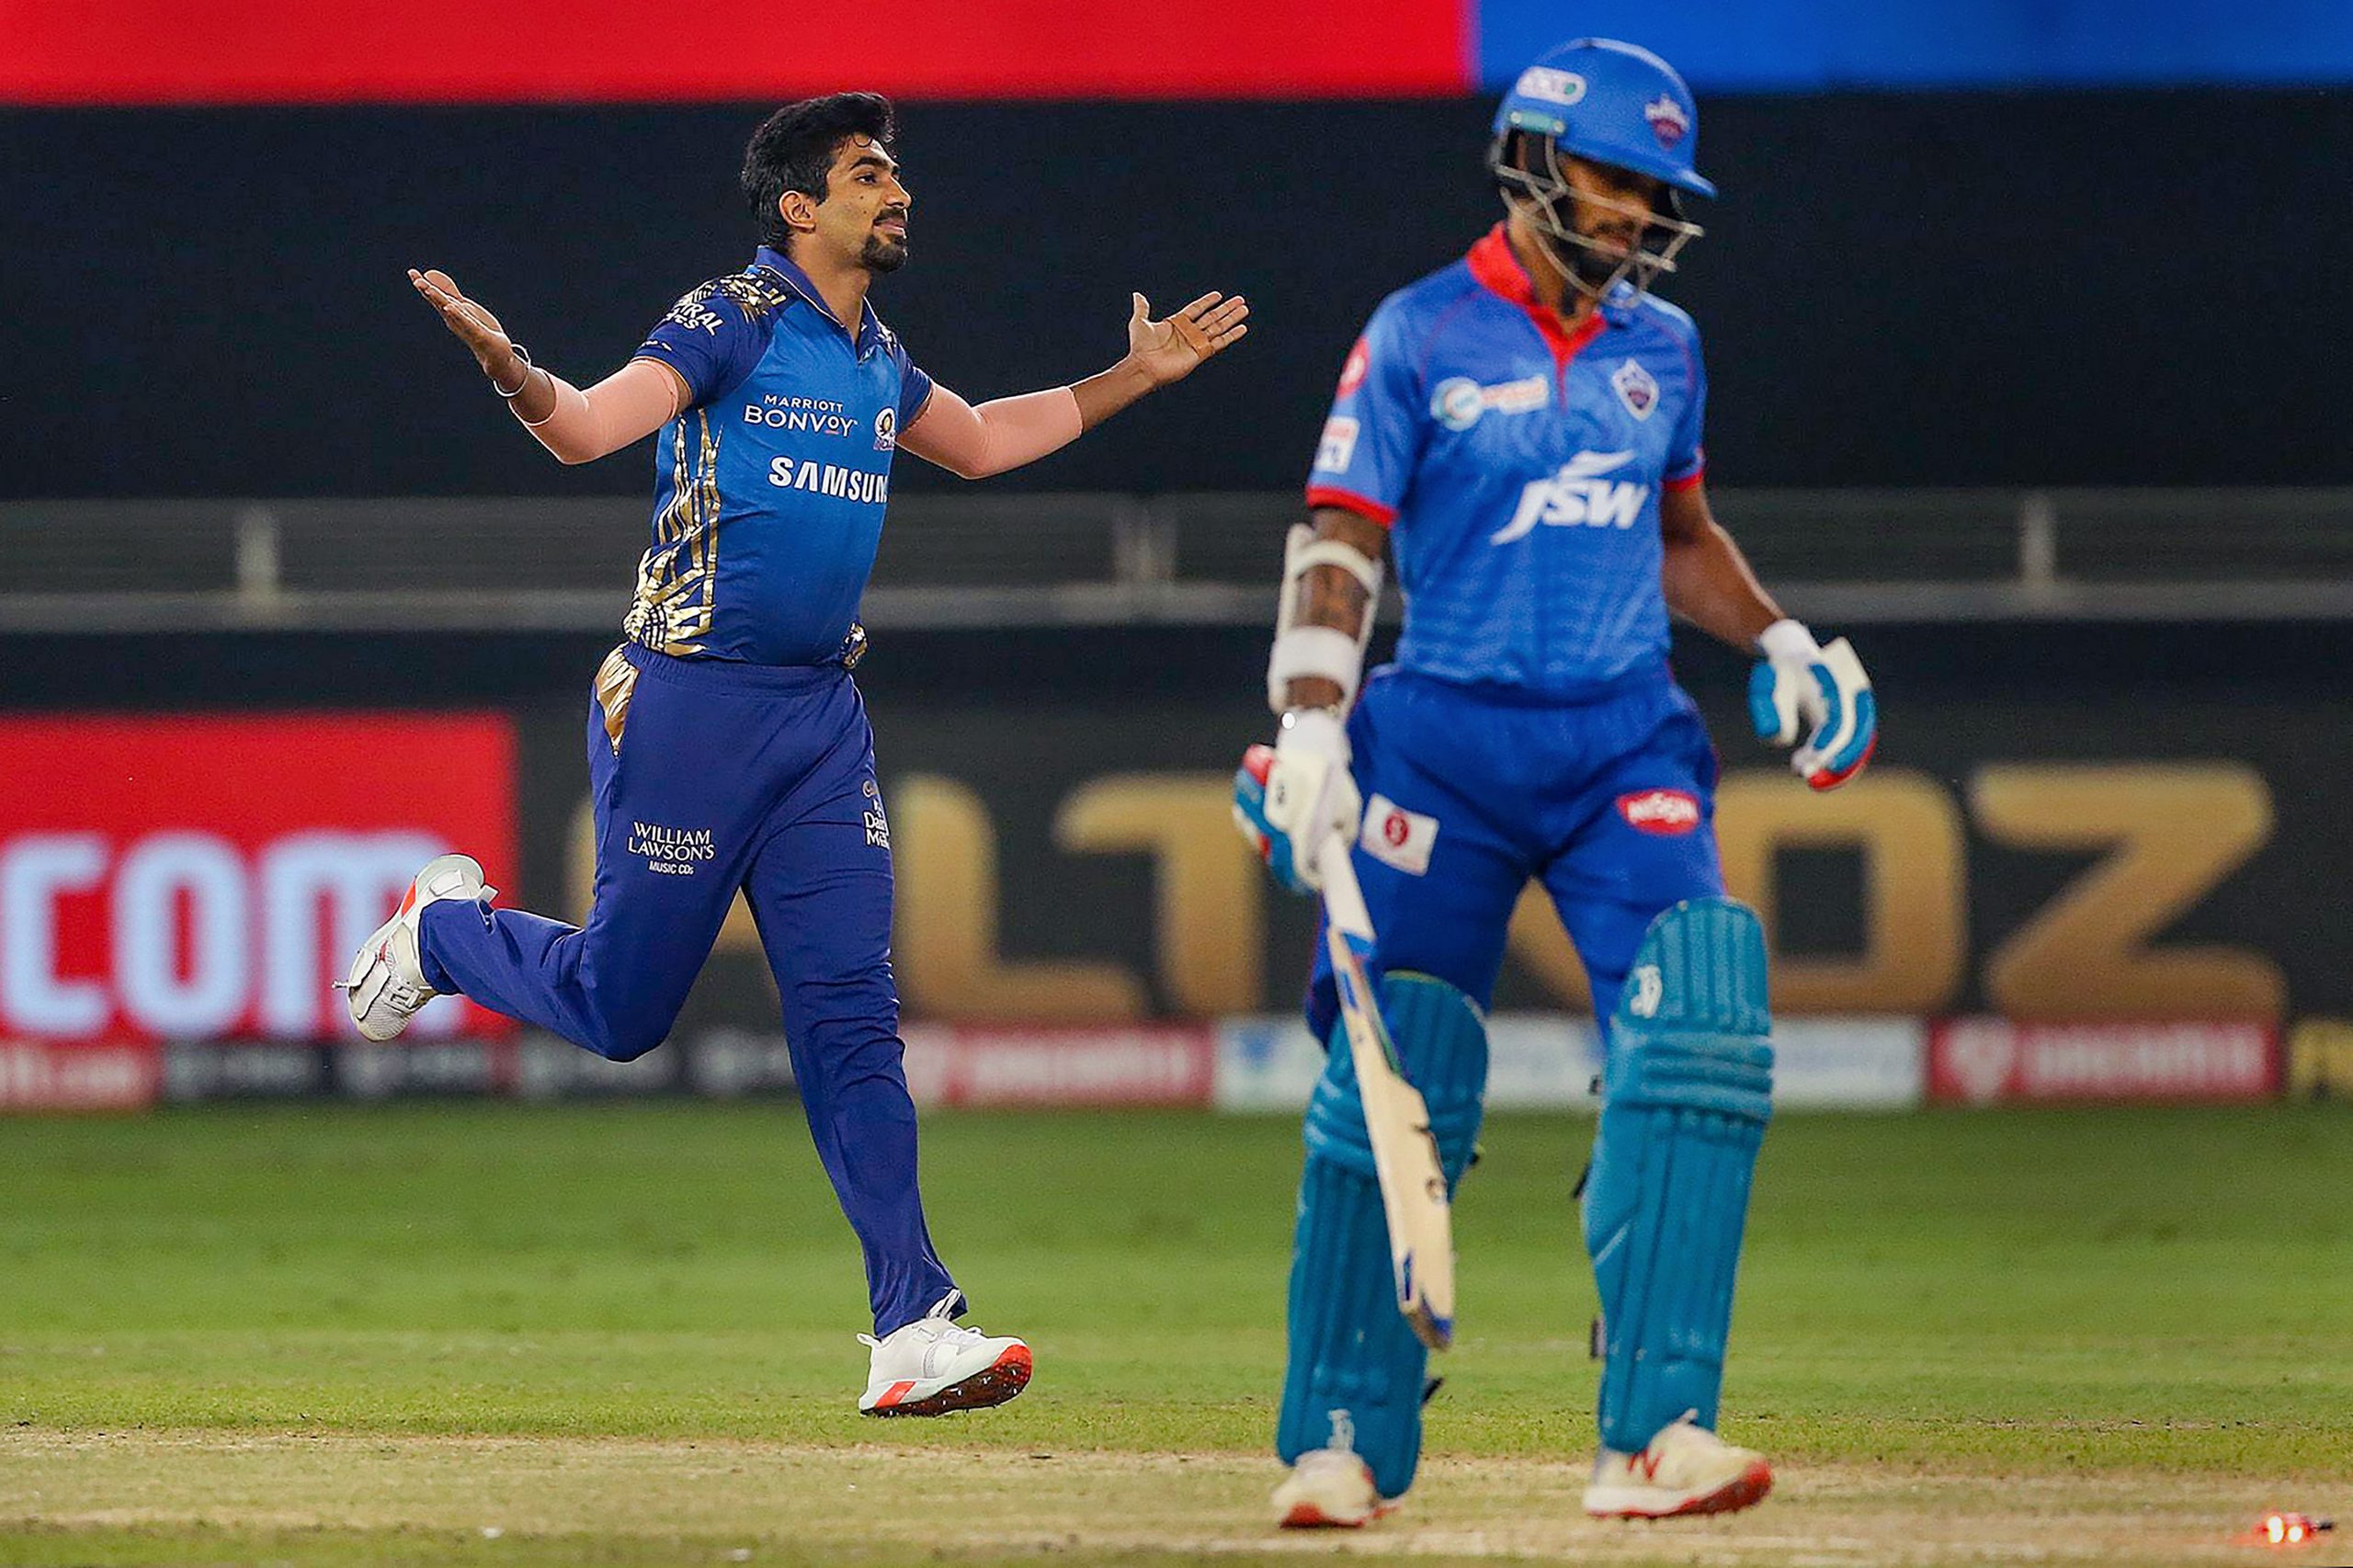 MI vs DC IPL 2020 Final: Key player battles to watch out for